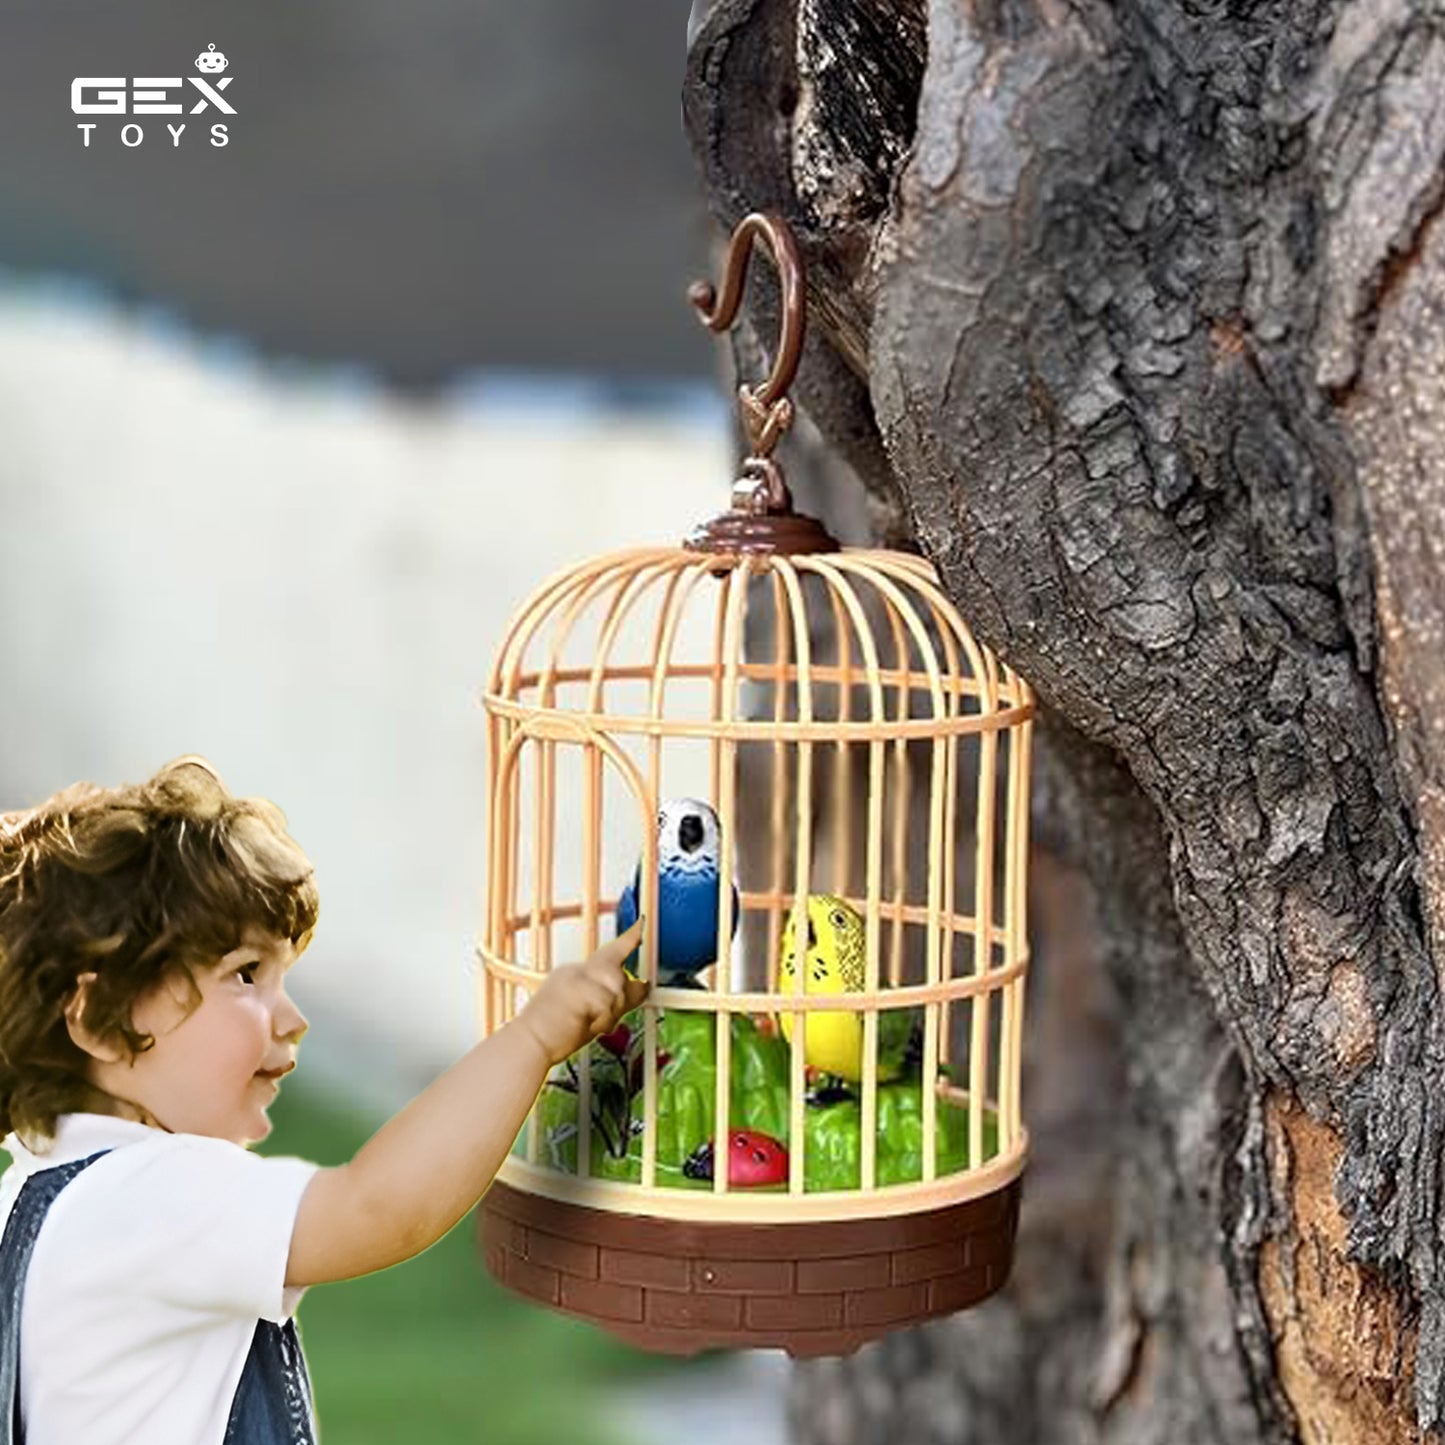 Kids Love to Play with Birds, Birds chirping sound with children clapping